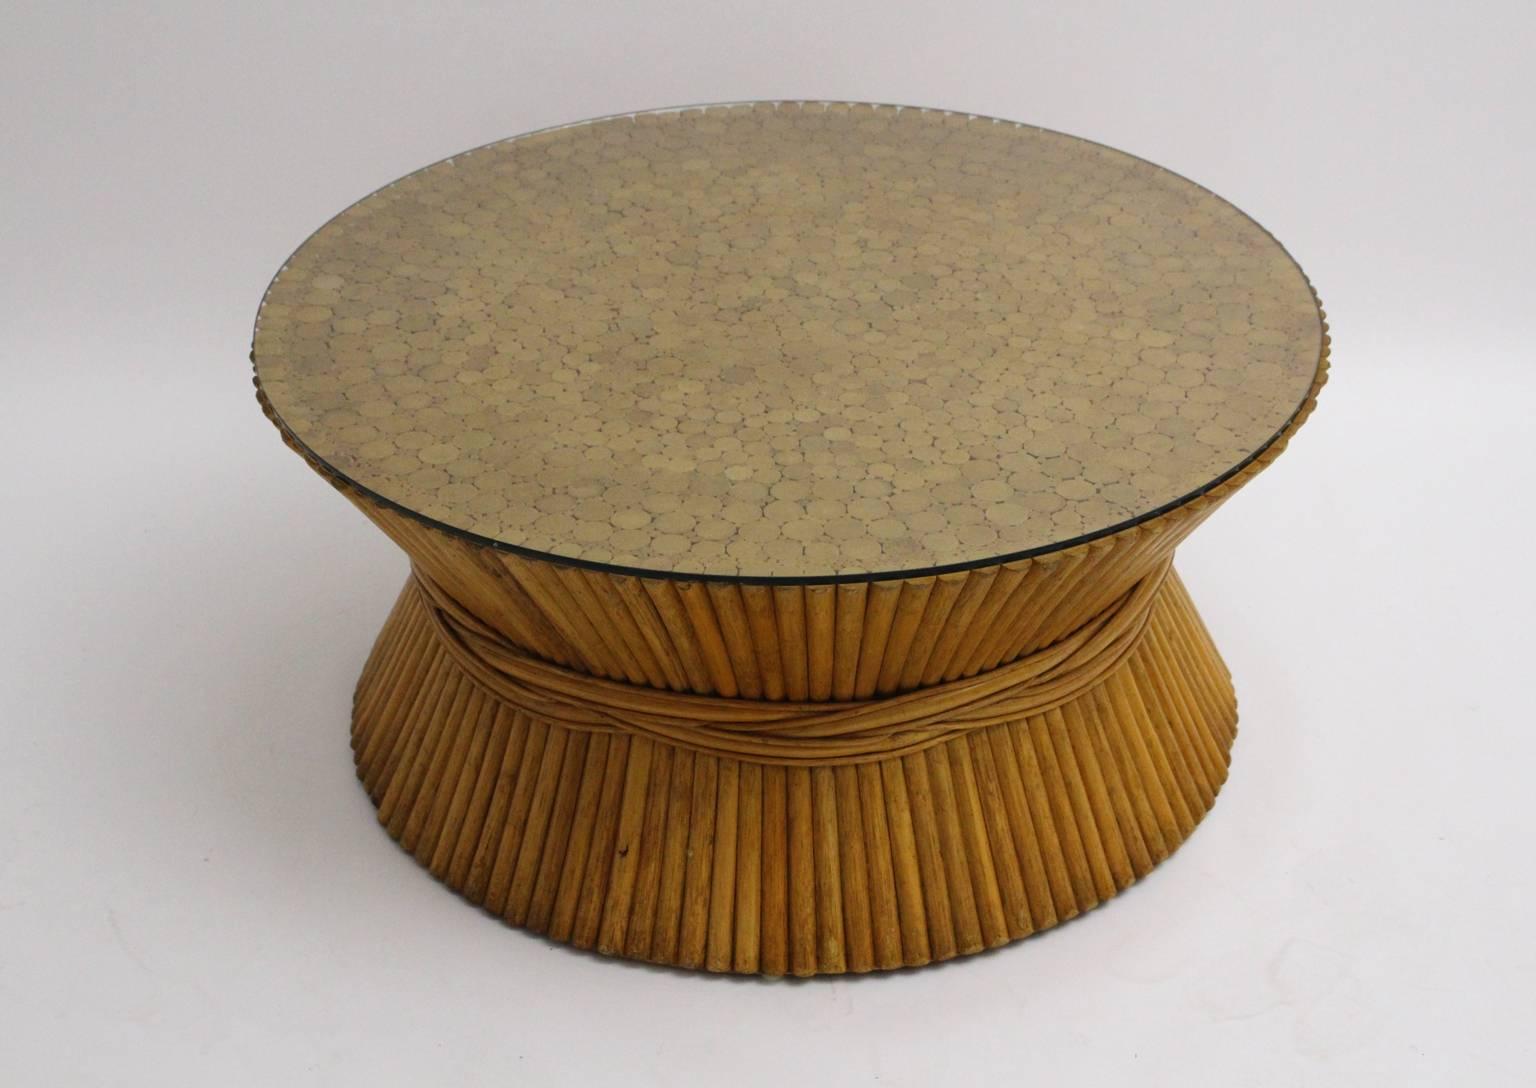 This presented vintage bamboo coffee table was designed by Mc Guire and features a sheaf of wheat with a round clear glass top in good condition.

The provenance is a private ownership in Vienna.

 